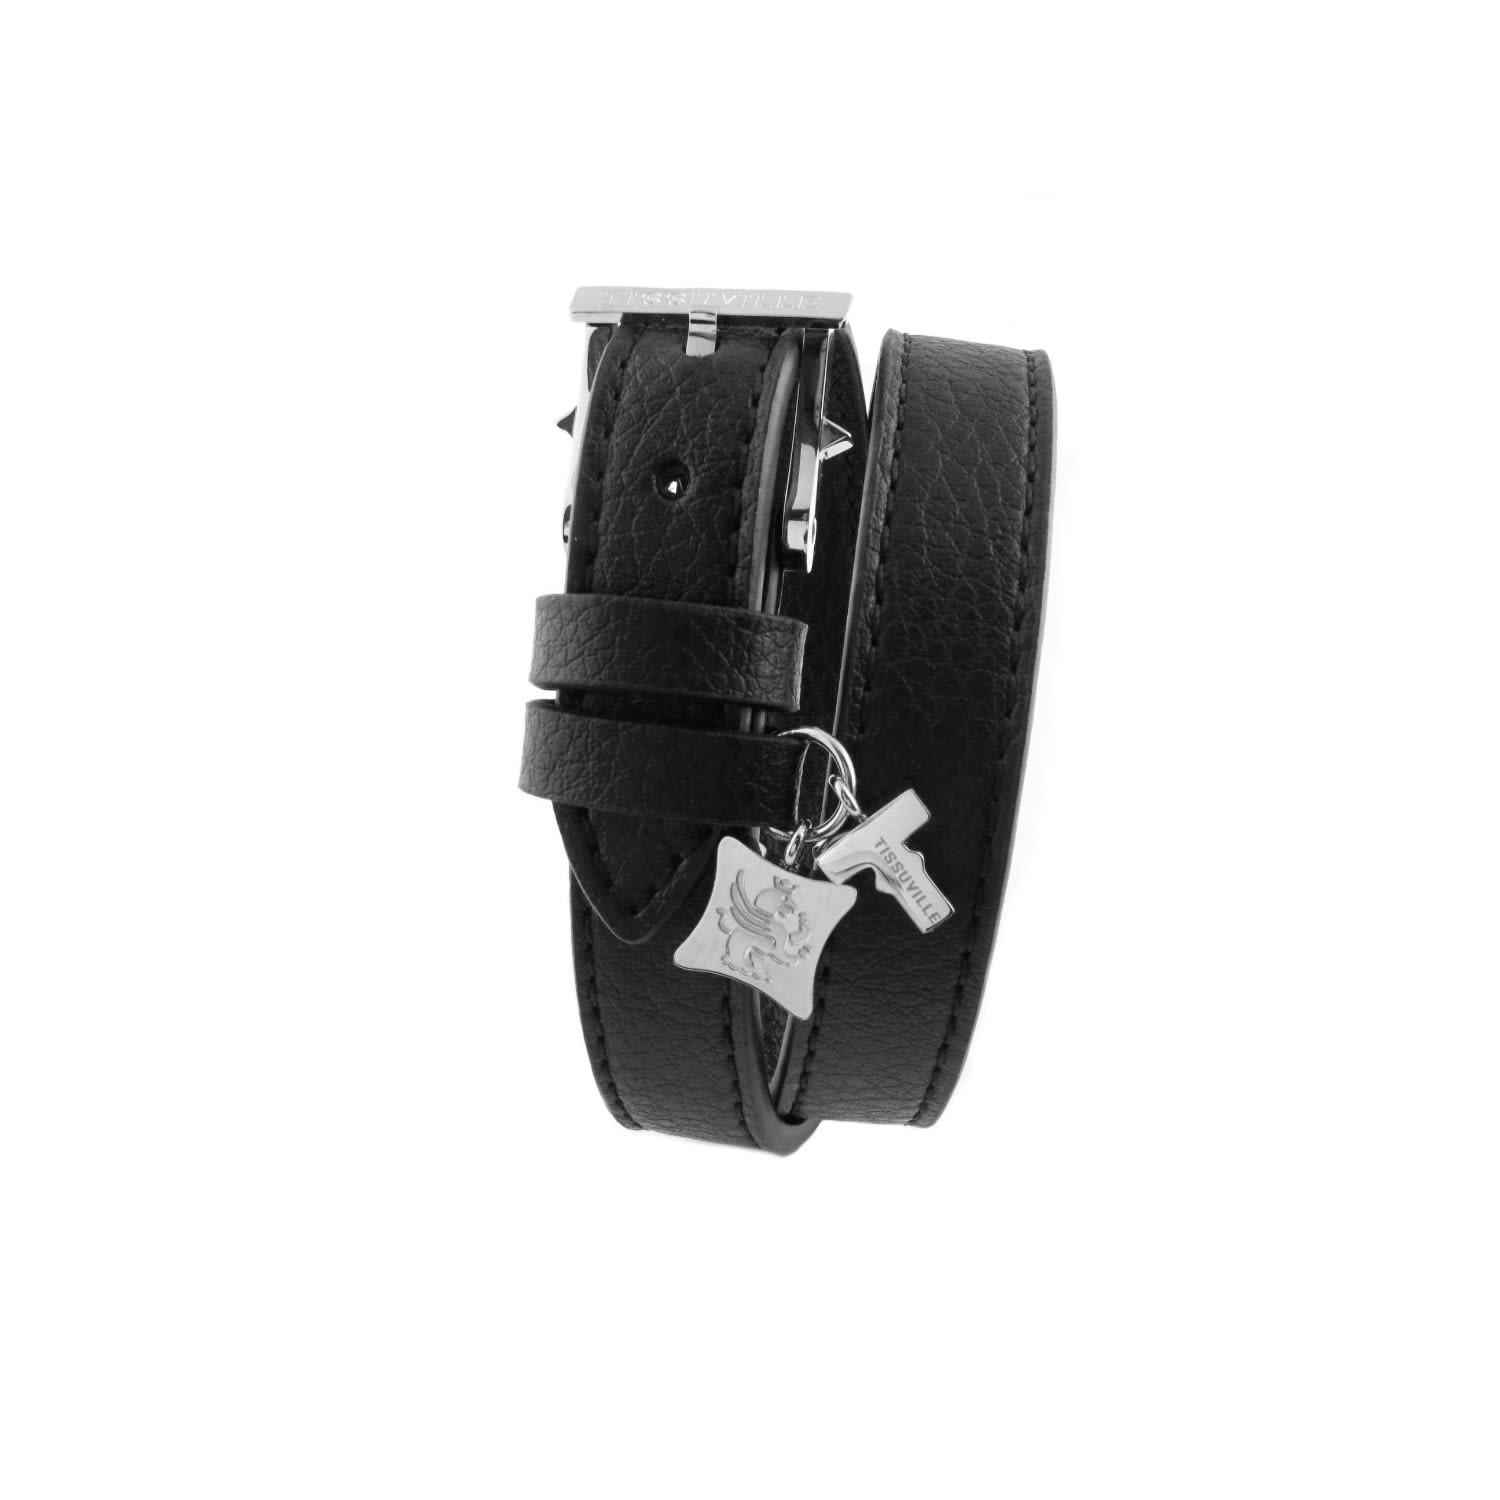 Men's Black Double Wrap Leather Bracelet With Silver-Tone Buckle - Illusionist Tissuville